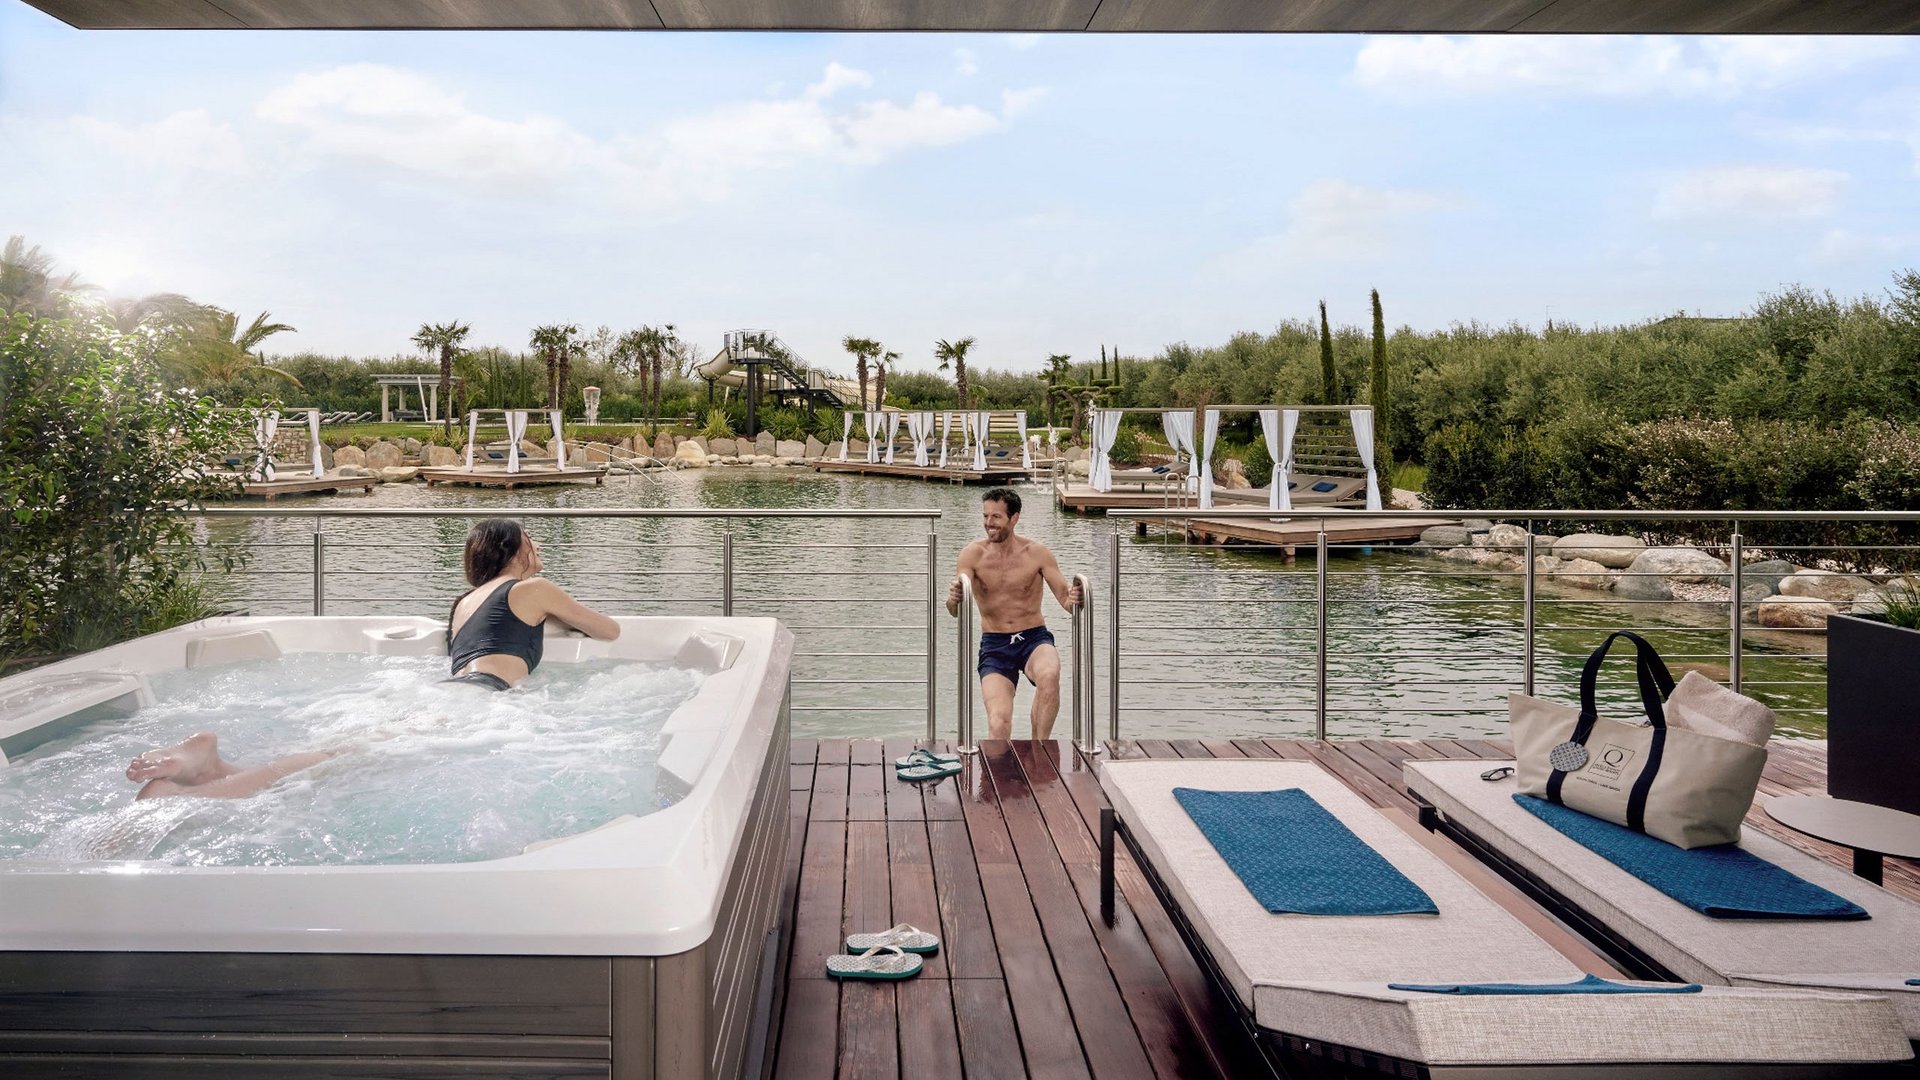 Luxury at Lake Garda: hotel with private jacuzzi in the room